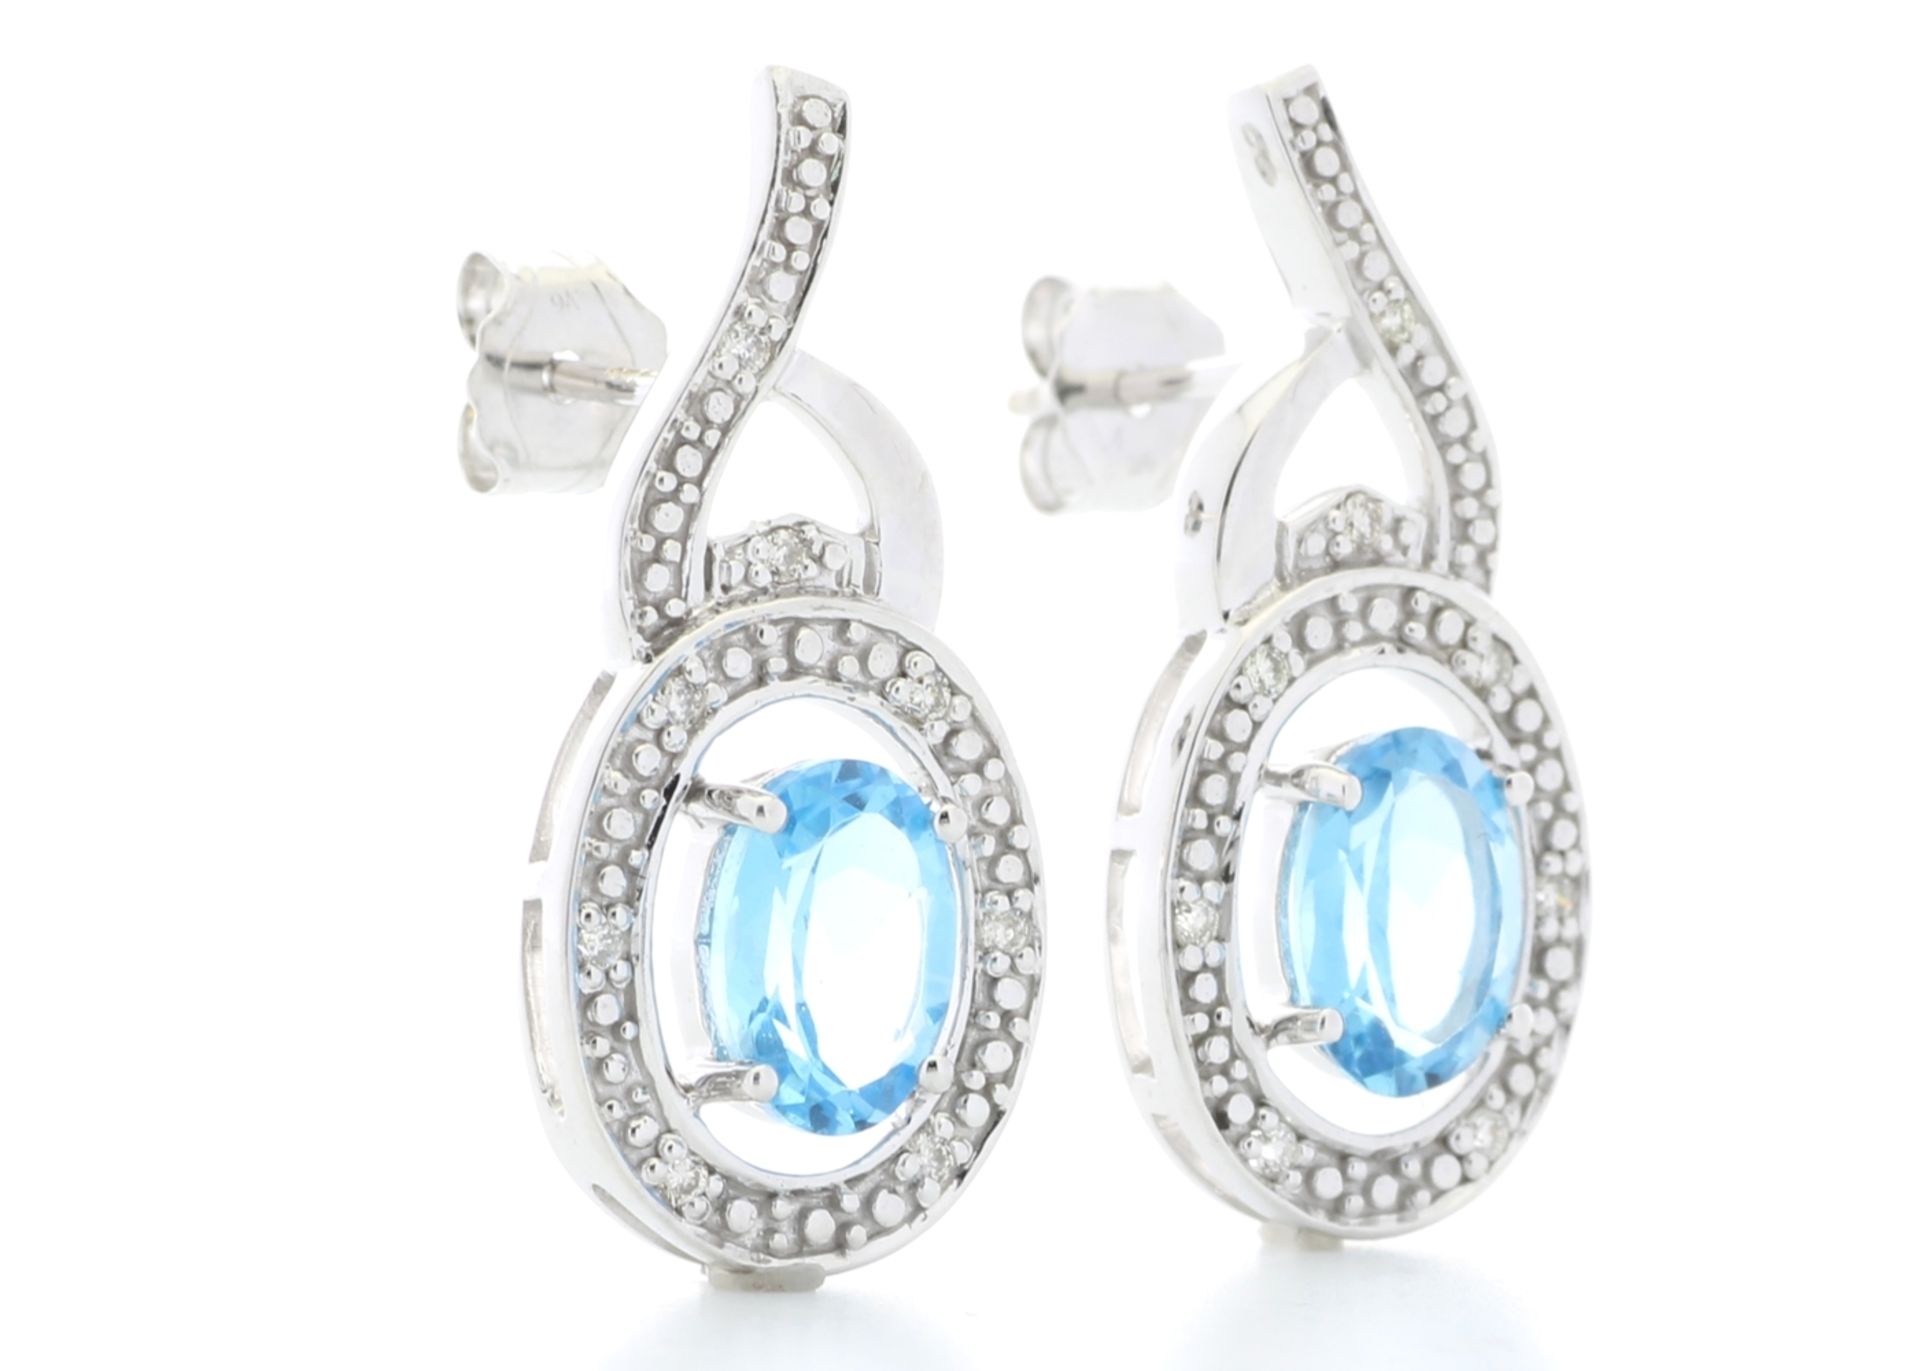 9ct White Gold Diamond And Blue Topaz Earring (BT1.69) 0.05 Carats - Valued By GIE £2,195.00 - A - Image 7 of 8